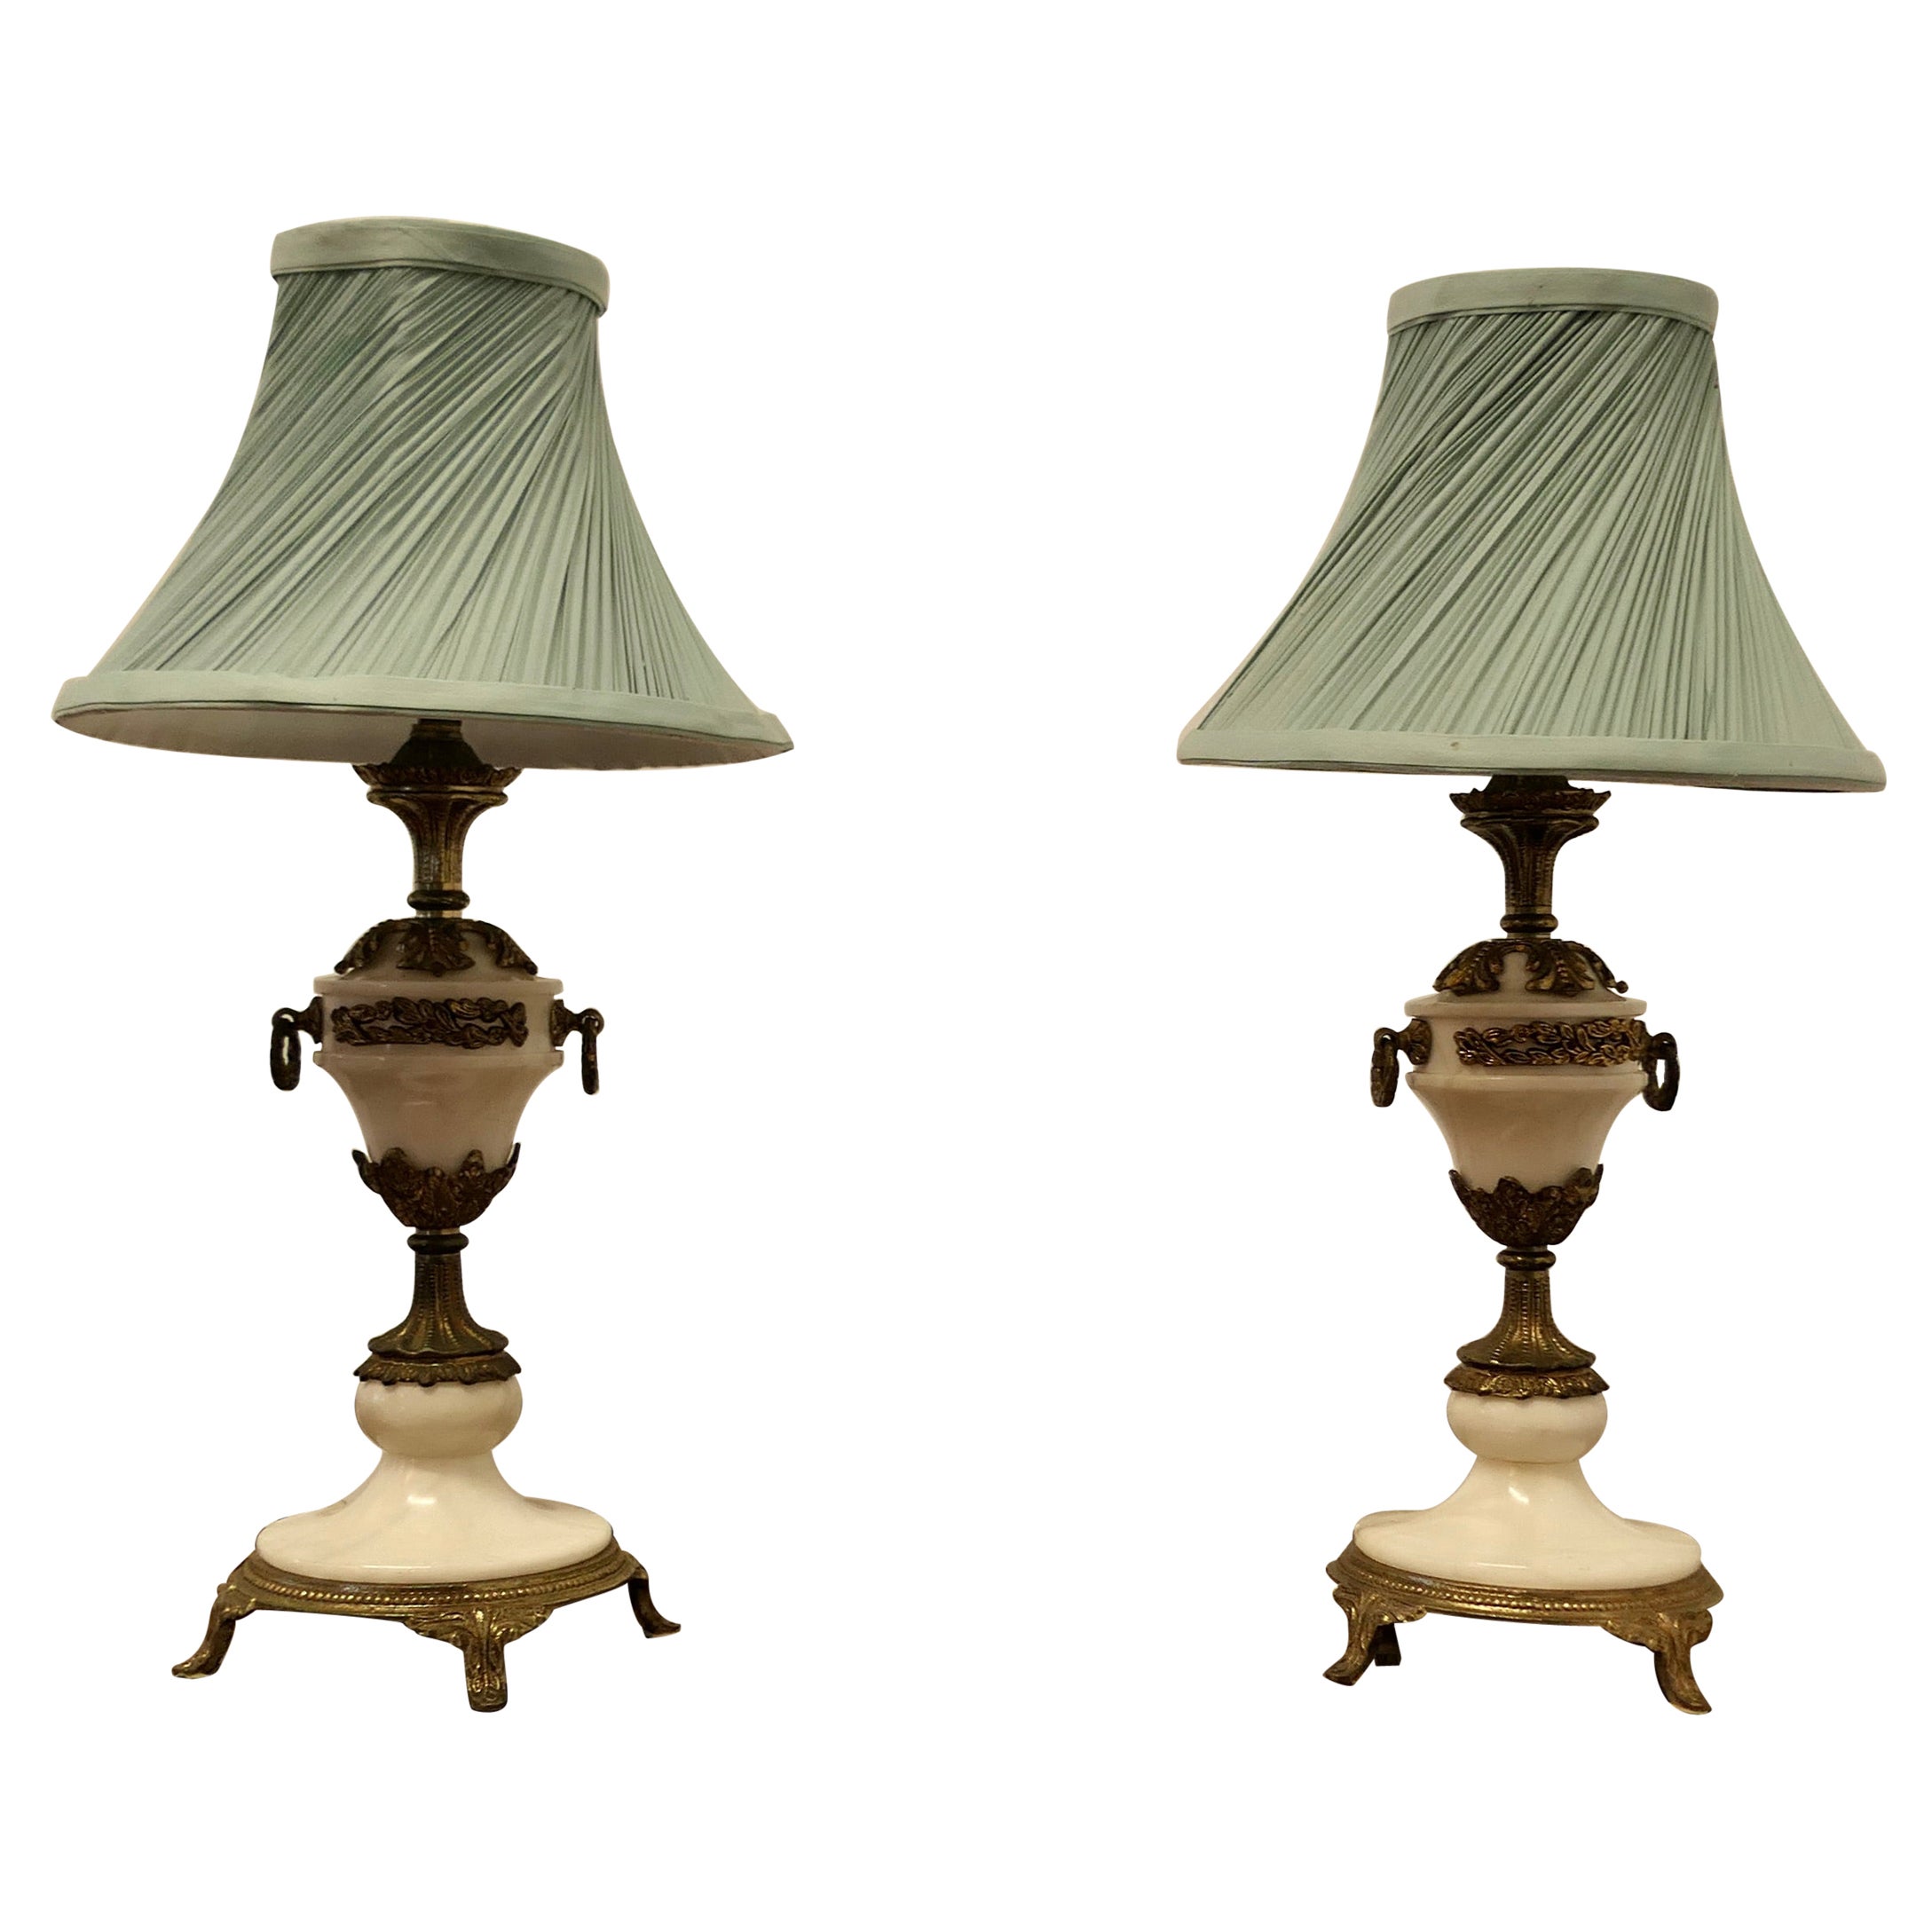 A Pair of White Marble and Ormolu Classical Greek Style Table Lamp  